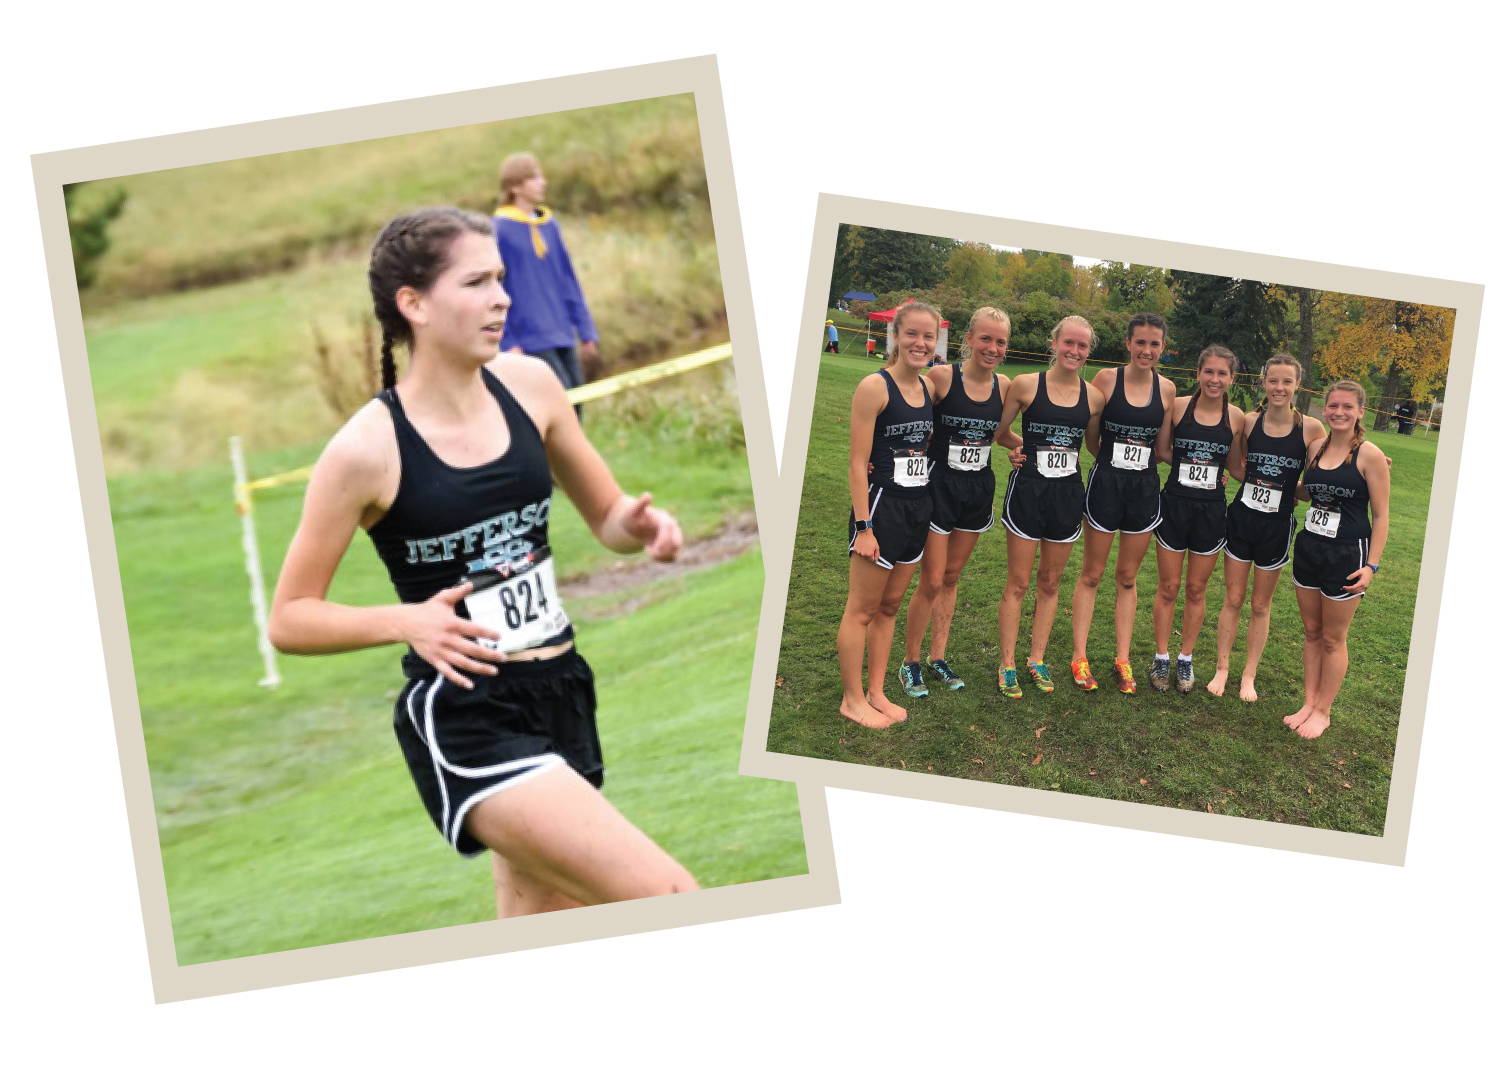 Elena Hayday as a high school athlete. Left: competing for her high school. Right: Posing with her teammates post-race